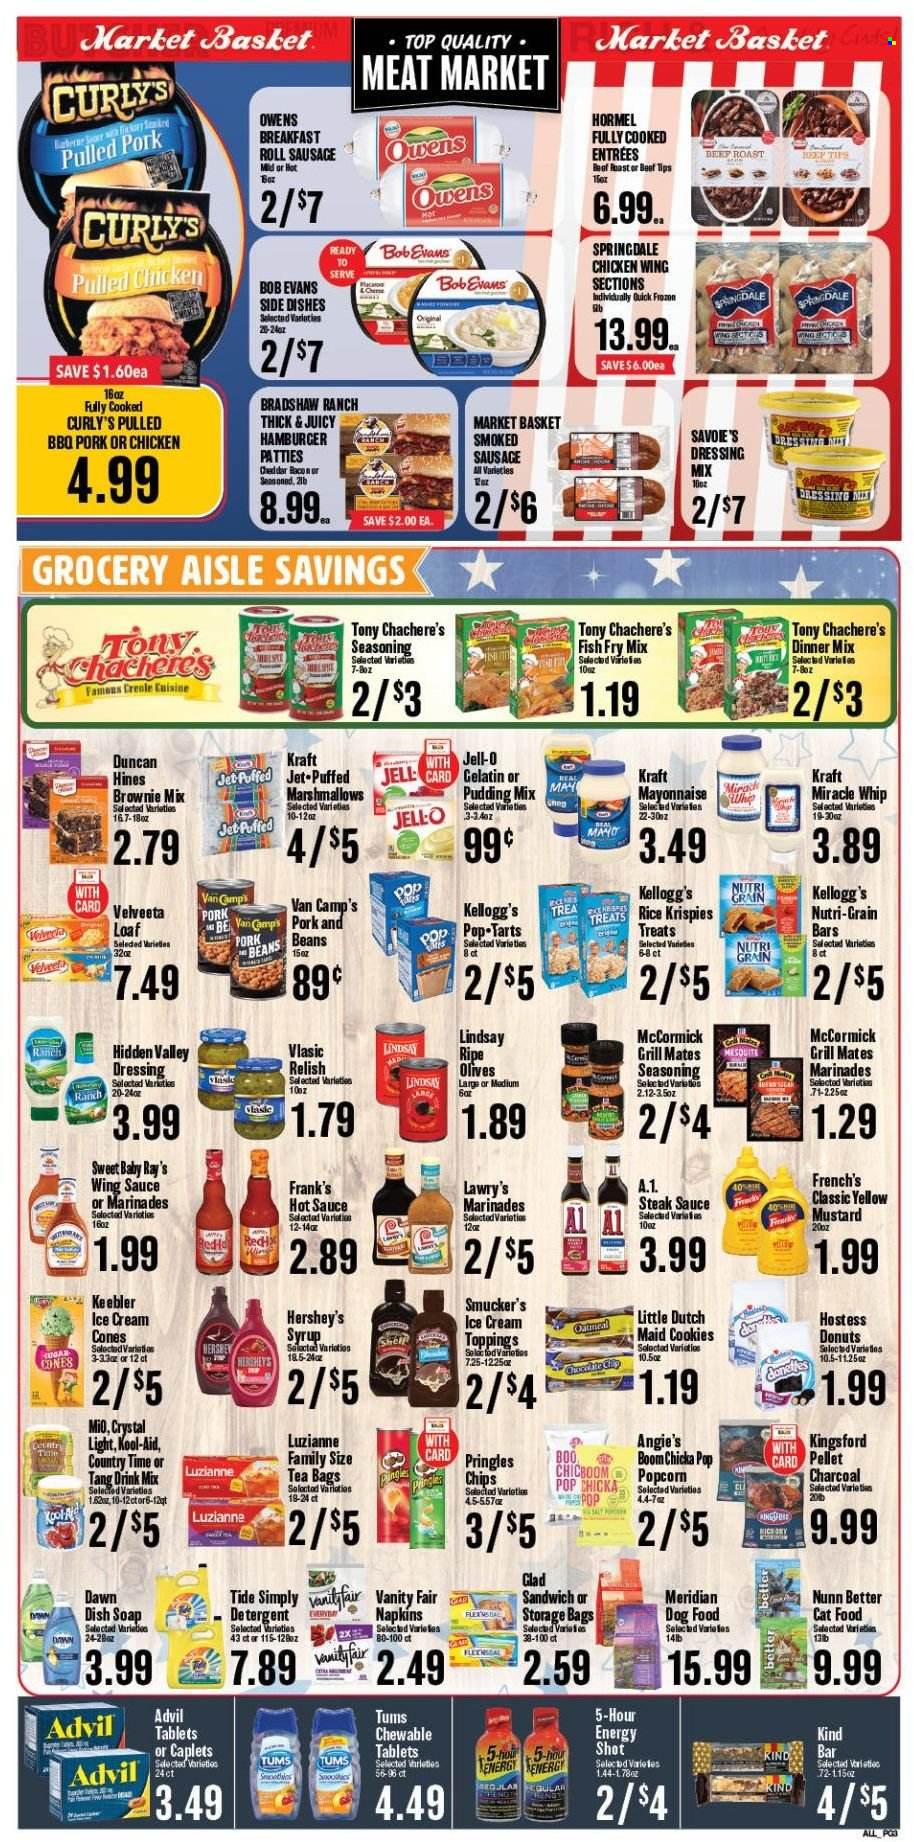 thumbnail - Market Basket Flyer - 05/25/2022 - 05/31/2022 - Sales products - donut, brownie mix, beans, fish, fried fish, hamburger, Kraft®, Bob Evans, pulled pork, pulled chicken, Hormel, bacon, sausage, smoked sausage, pudding, mayonnaise, Miracle Whip, ice cream, Hershey's, cookies, marshmallows, Kellogg's, Pop-Tarts, Nutri-Grain bars, Keebler, Pringles, chips, popcorn, oatmeal, Jell-O, olives, Rice Krispies, Nutri-Grain, spice, mustard, steak sauce, hot sauce, dressing, wing sauce, syrup, Country Time, tea bags, beef meat, steak, roast beef, pork meat, detergent, napkins, Tide, animal food, cat food, dog food. Page 3.